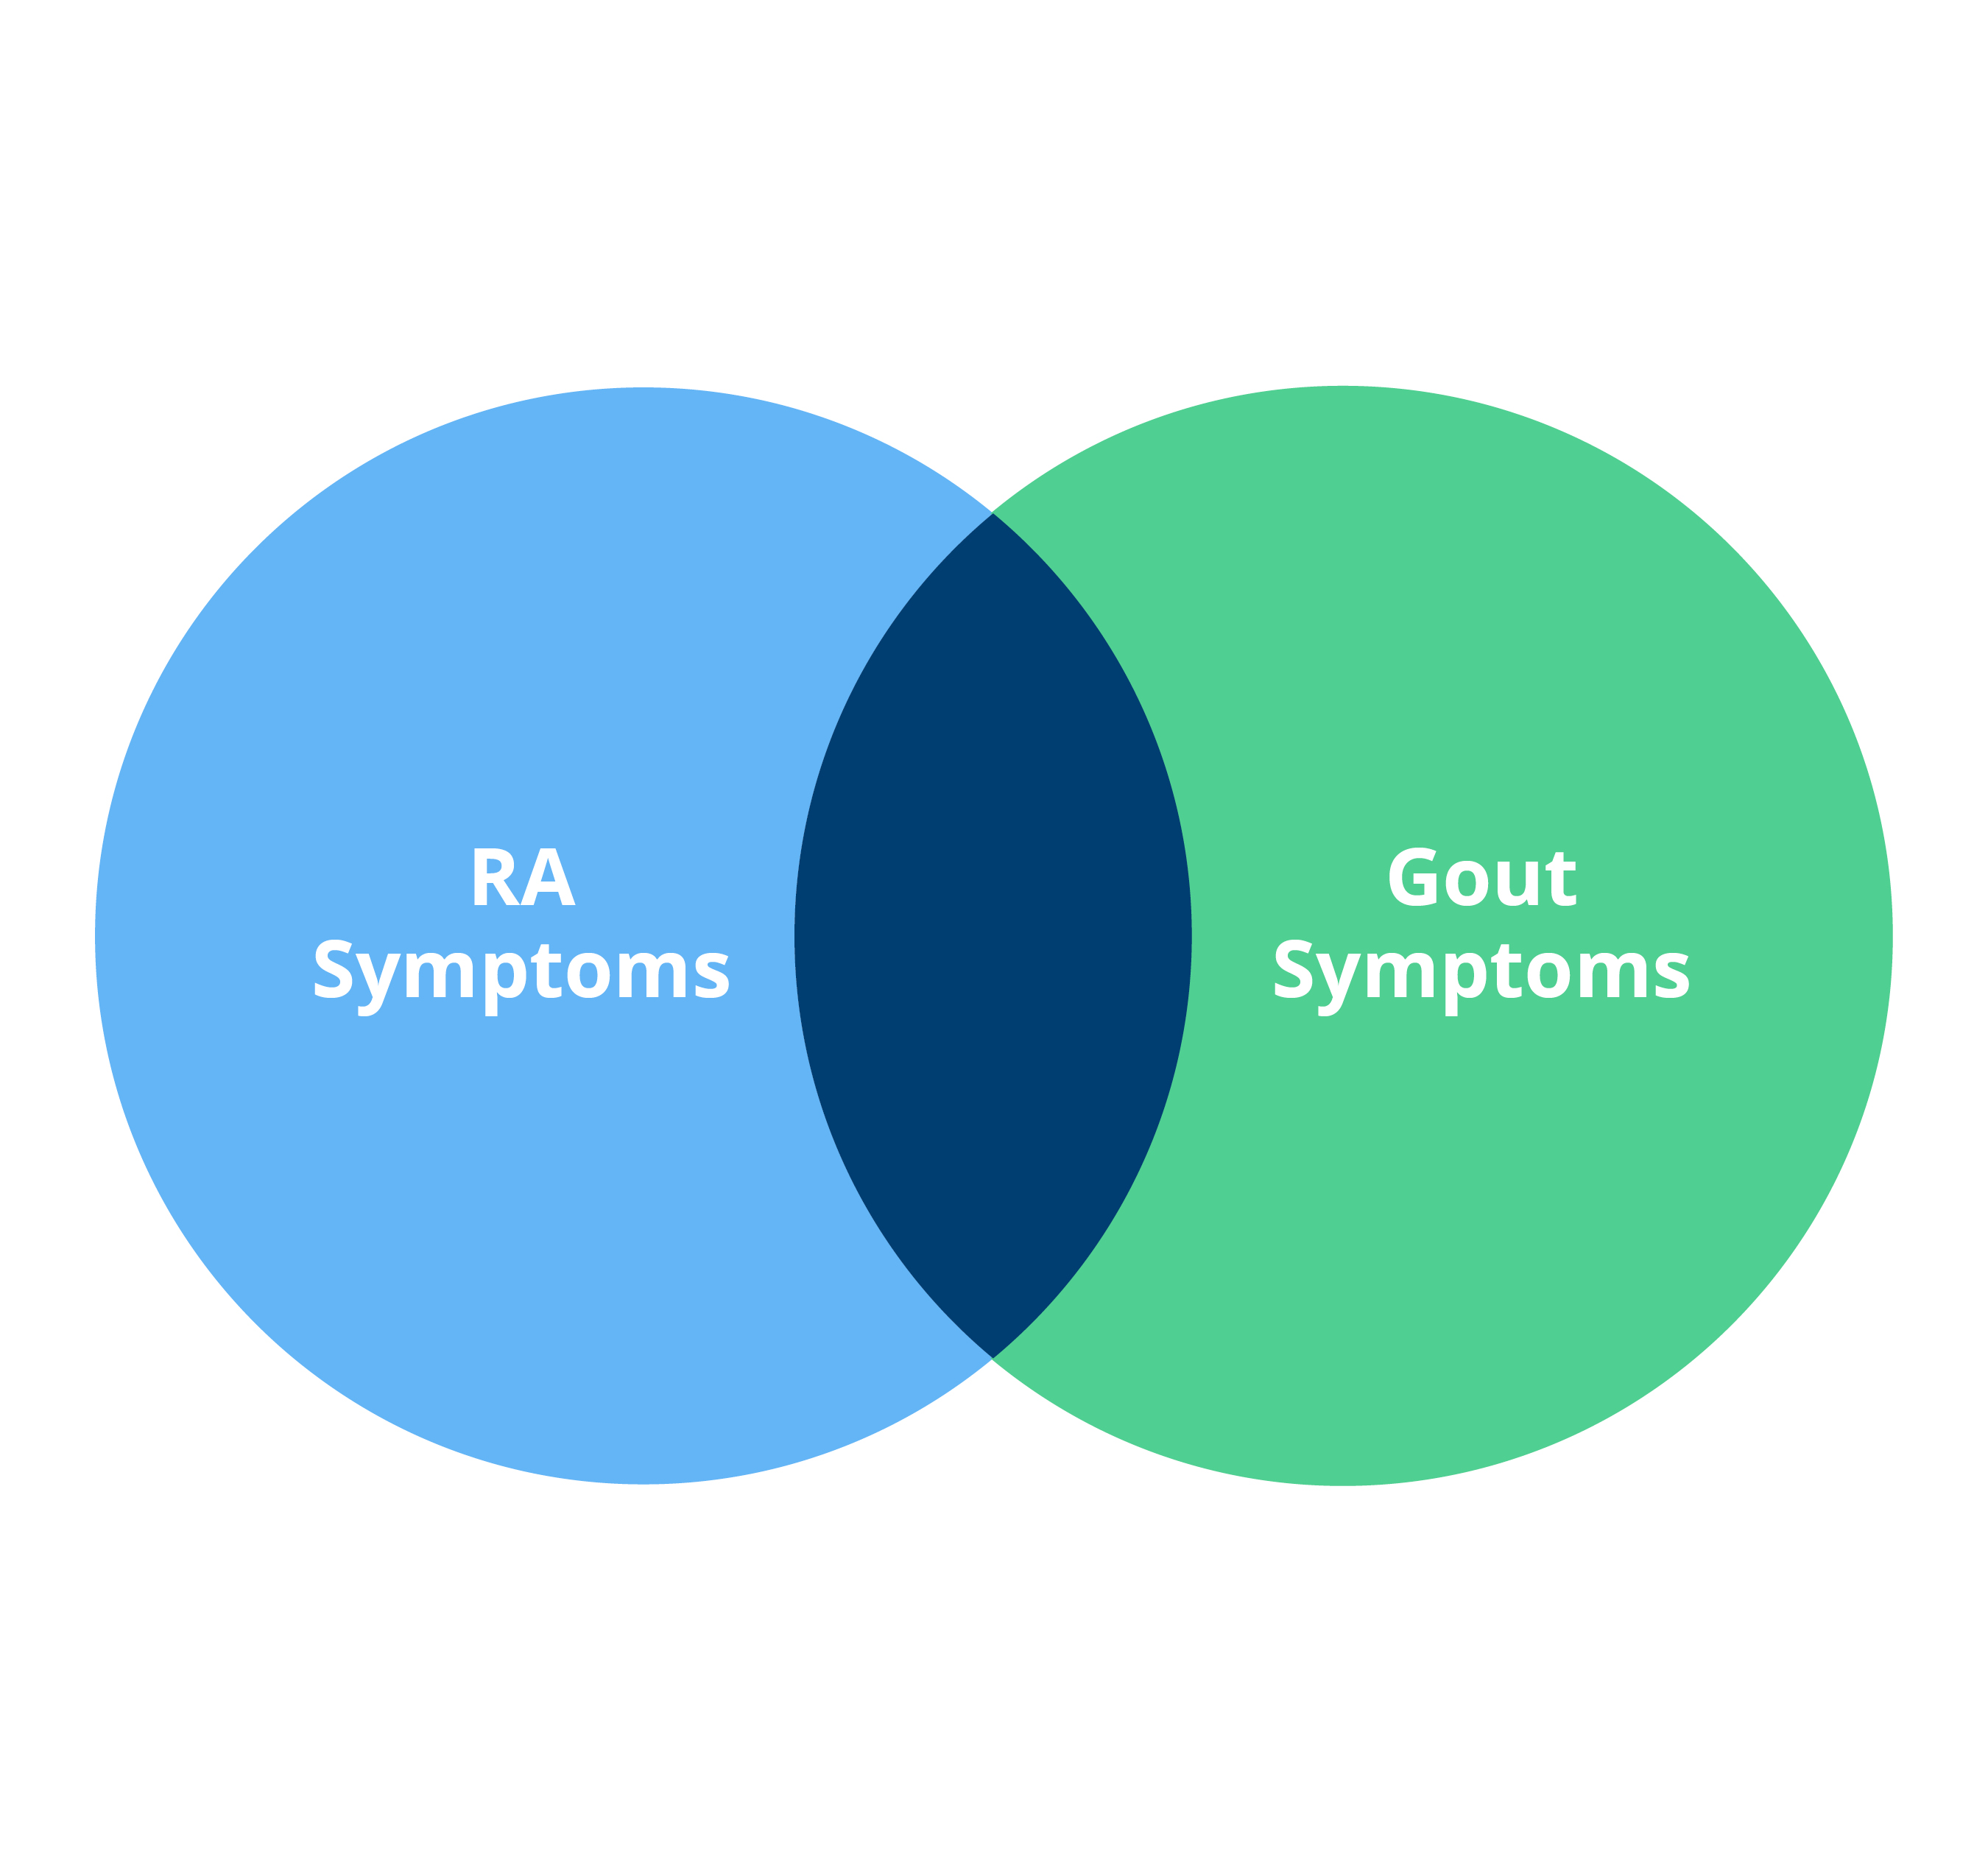 Are there any over-the-counter treatments for gout?